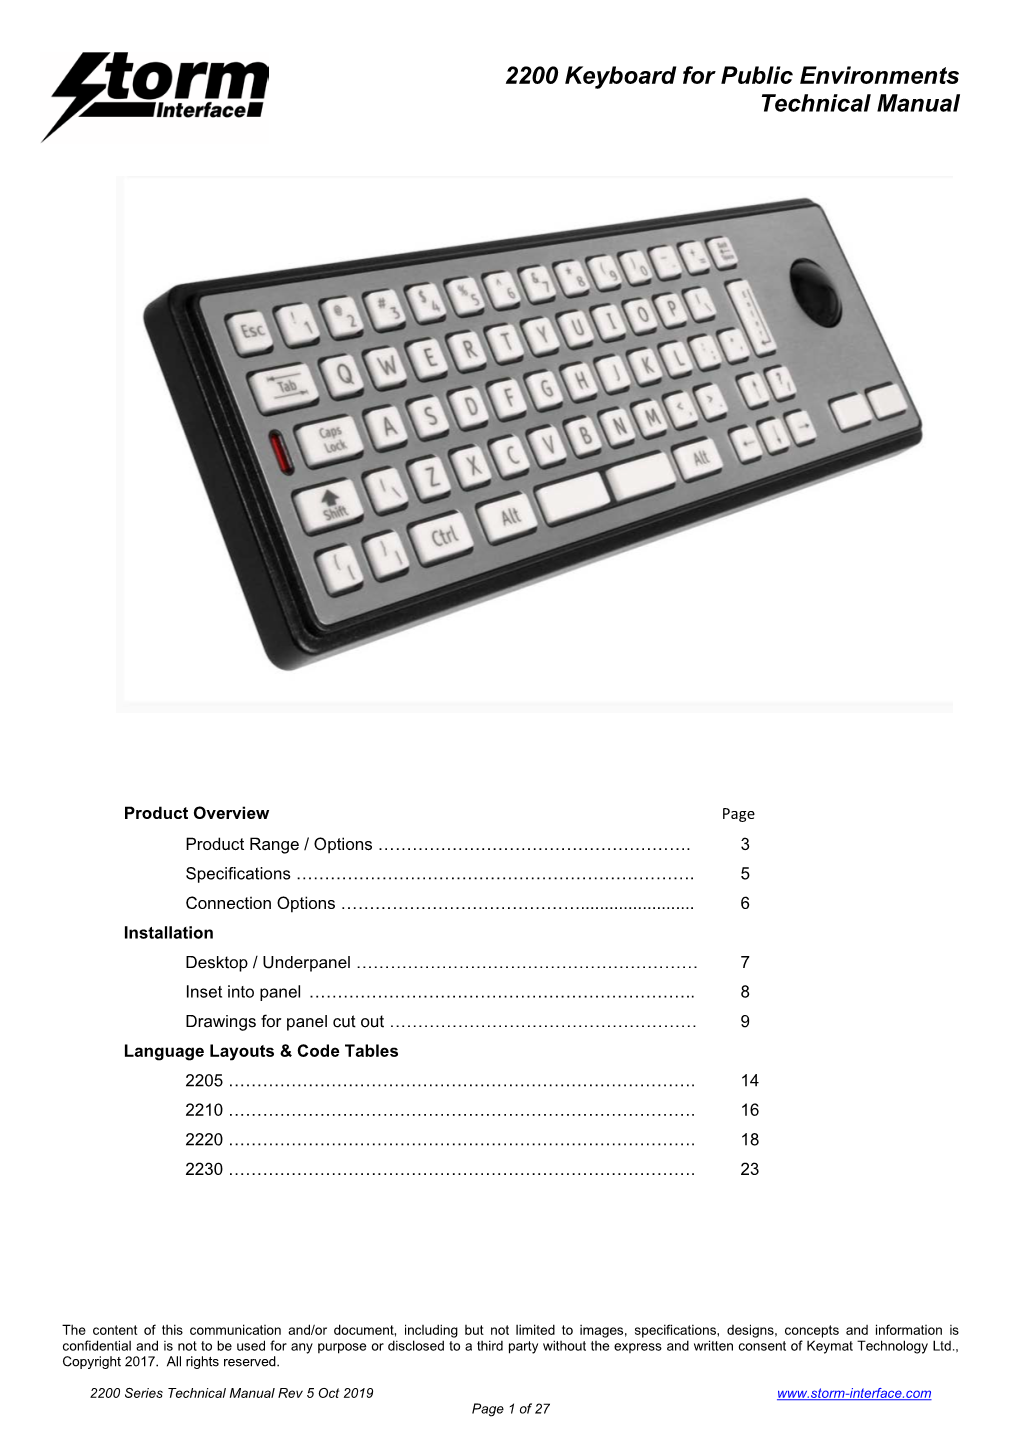 2200 Keyboard for Public Environments Technical Manual